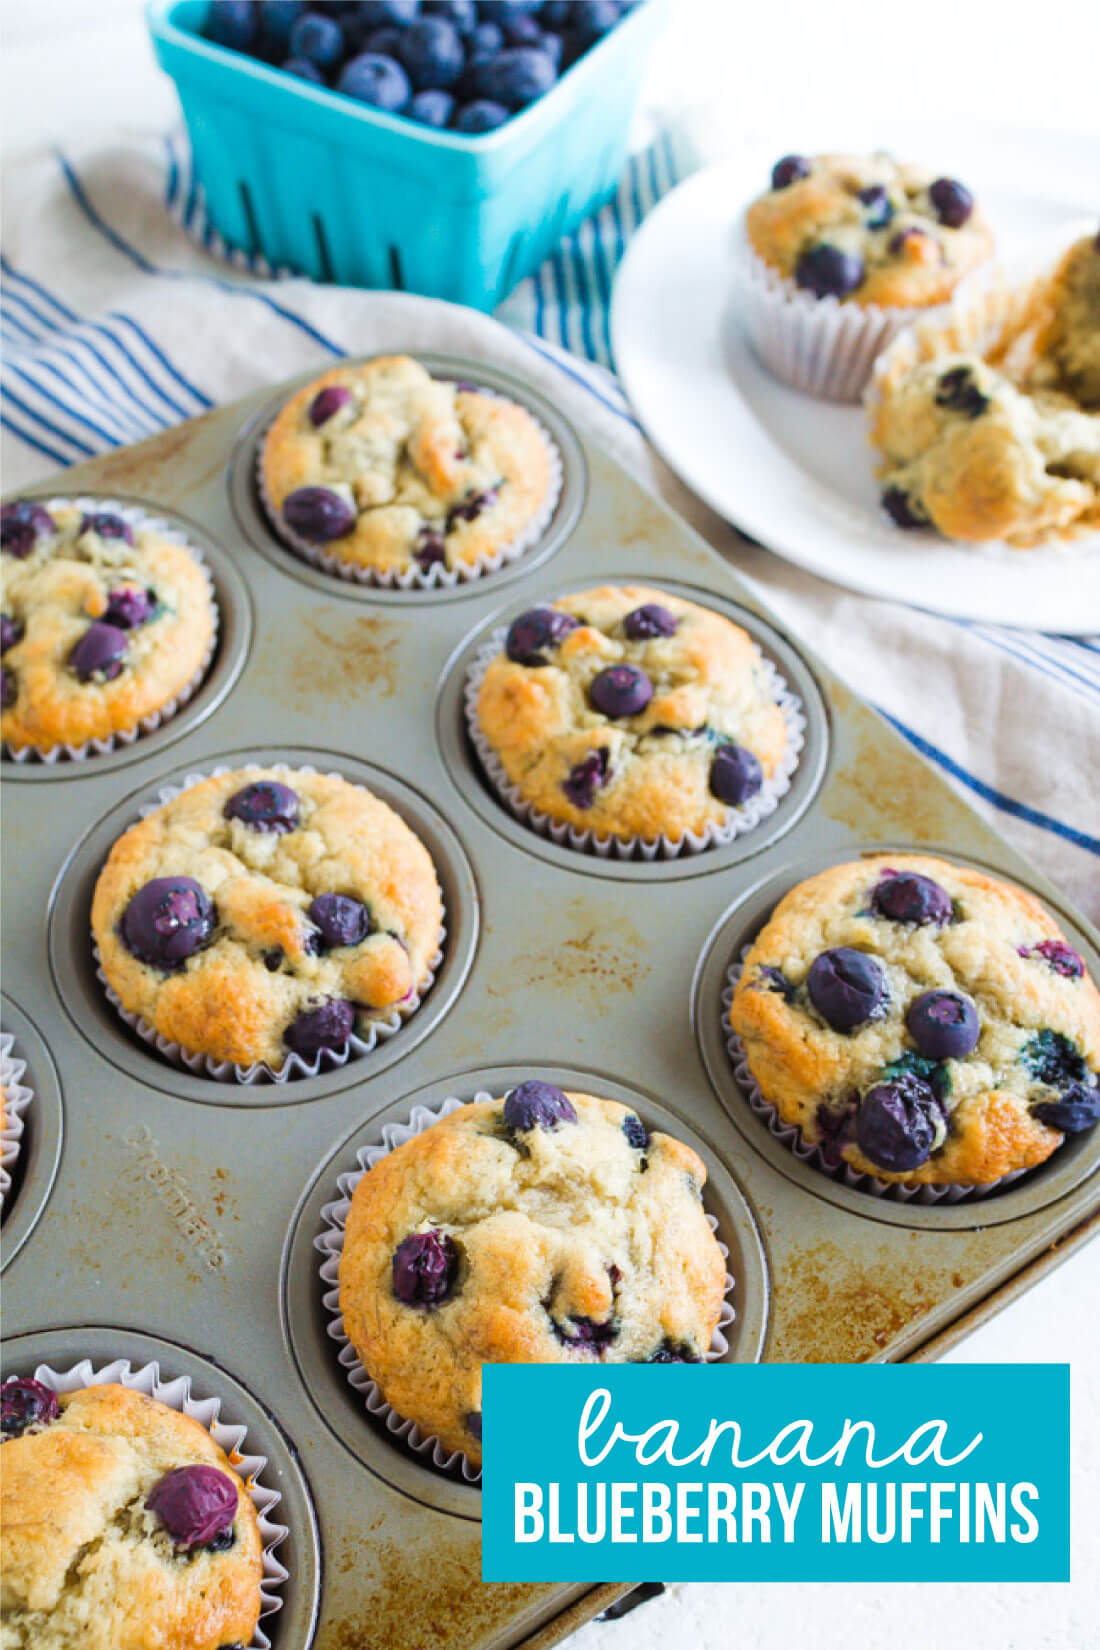 Simple to make and family friendly, these Banana Blueberry Muffins are super tasty. You'll want to make this blueberry muffin recipe over again and again.